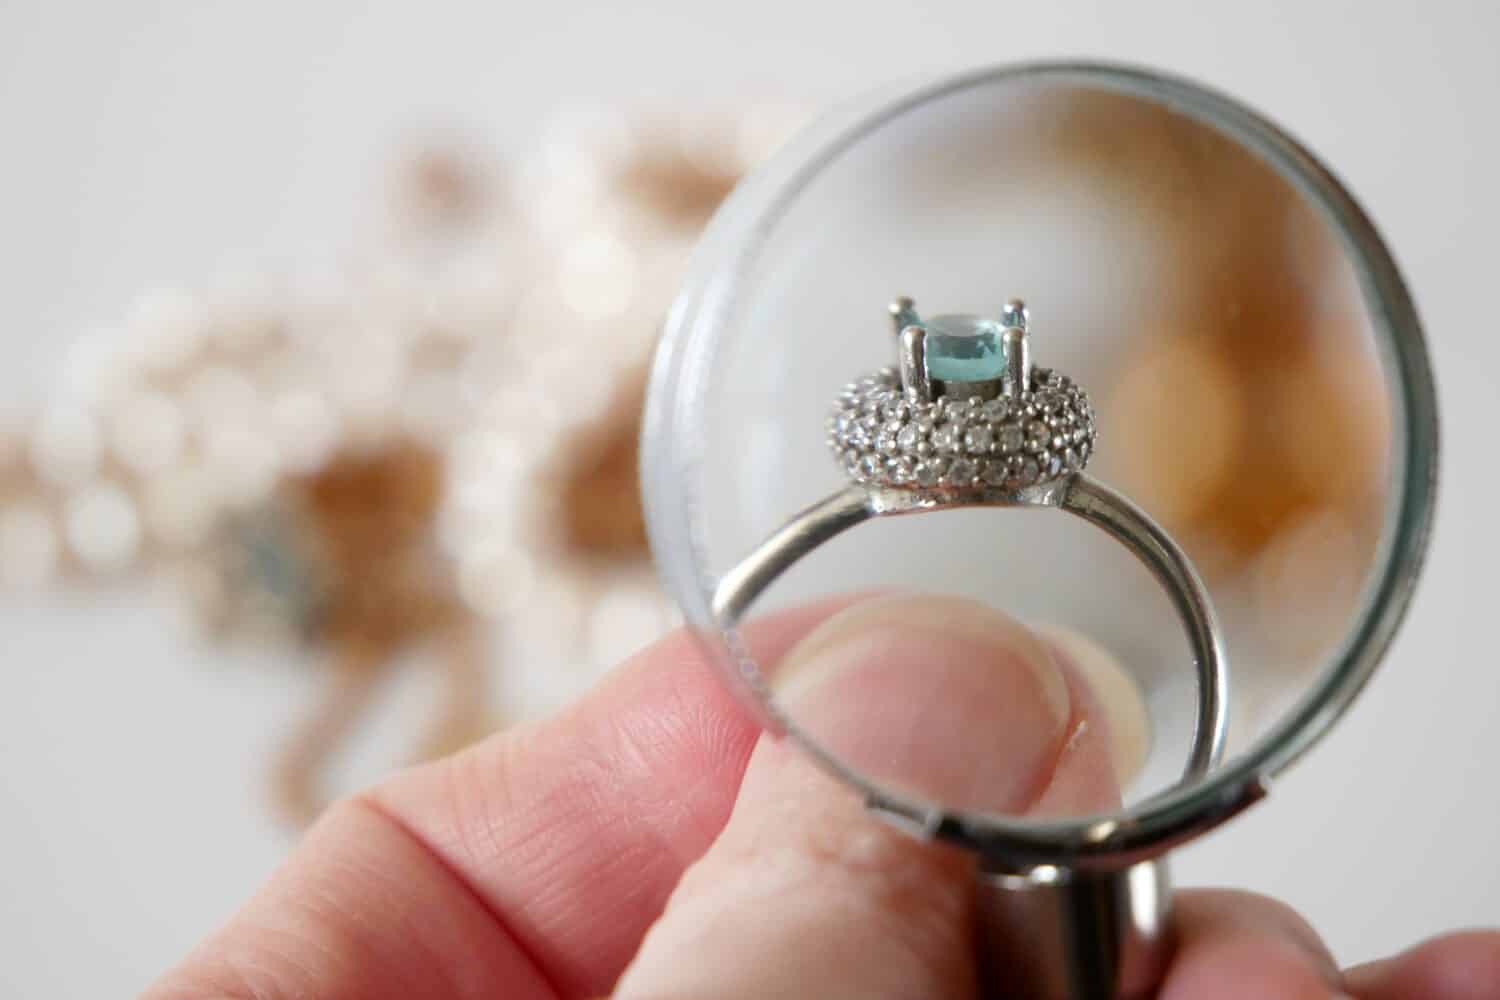 jeweler looking at ring with blue stone, jewerly inspect and verify, pawnshop concept, jewerly shop, closeup